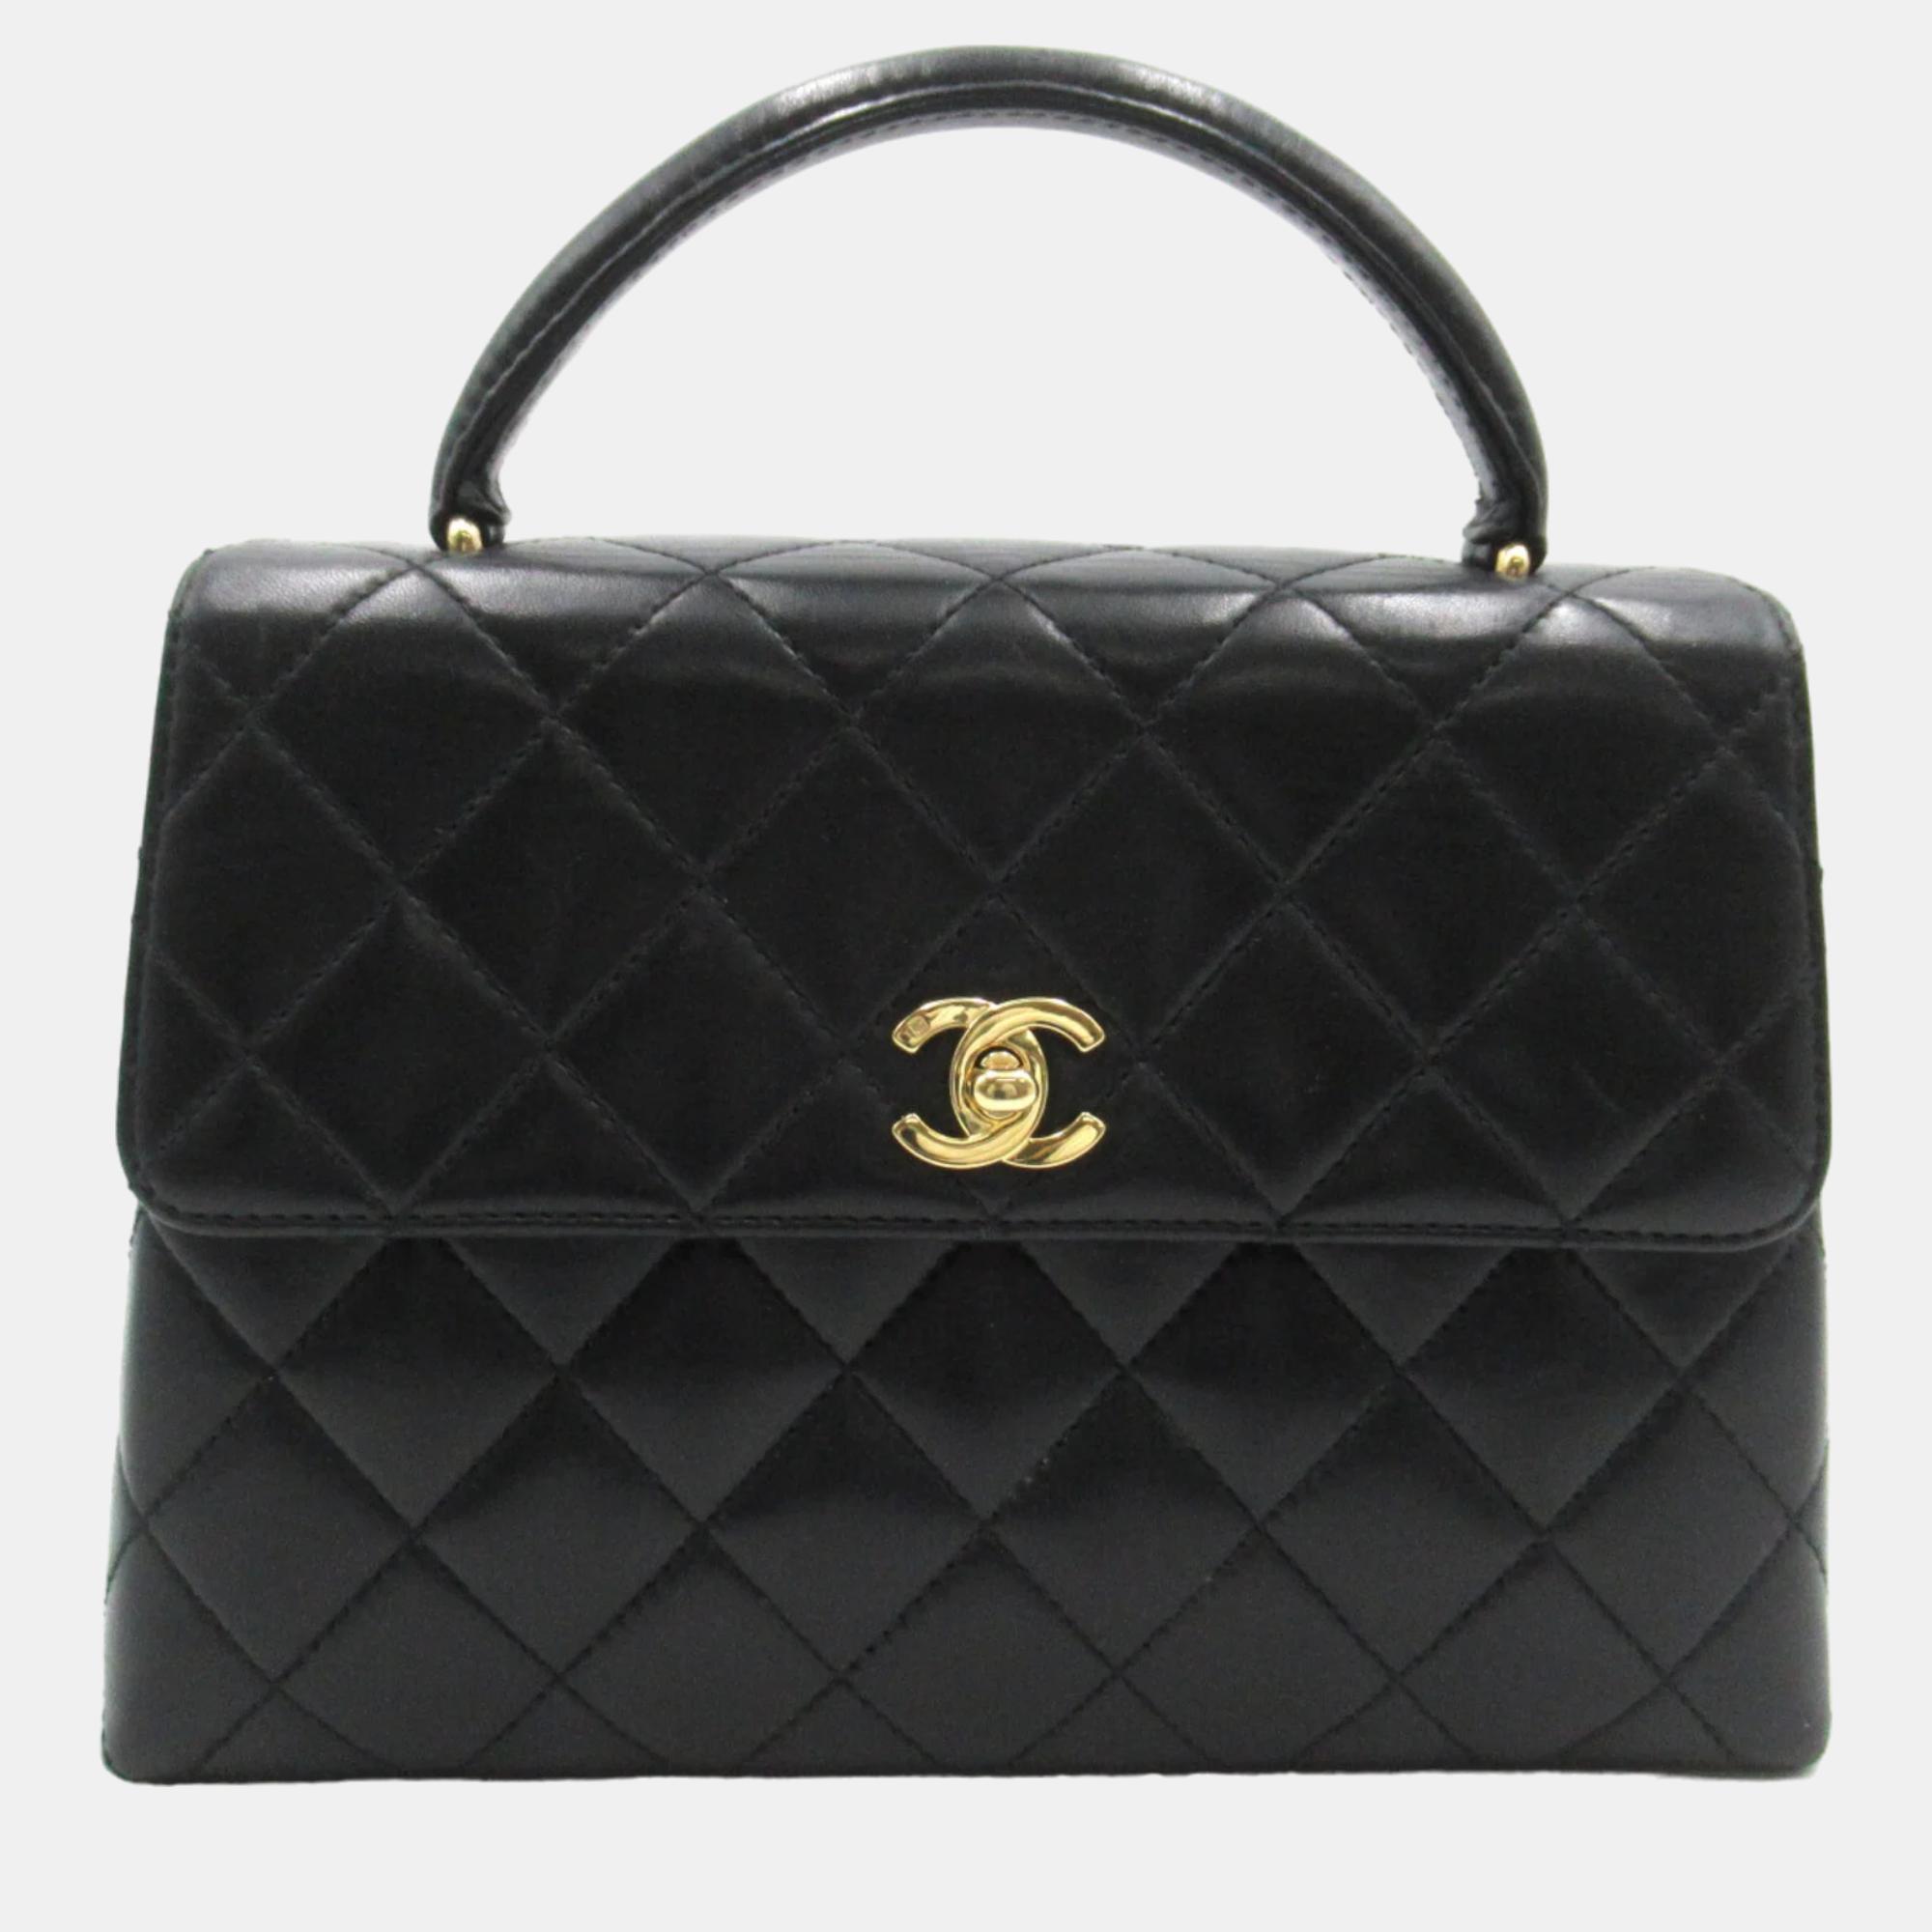 Chanel black quilted leather small kelly top handle bag